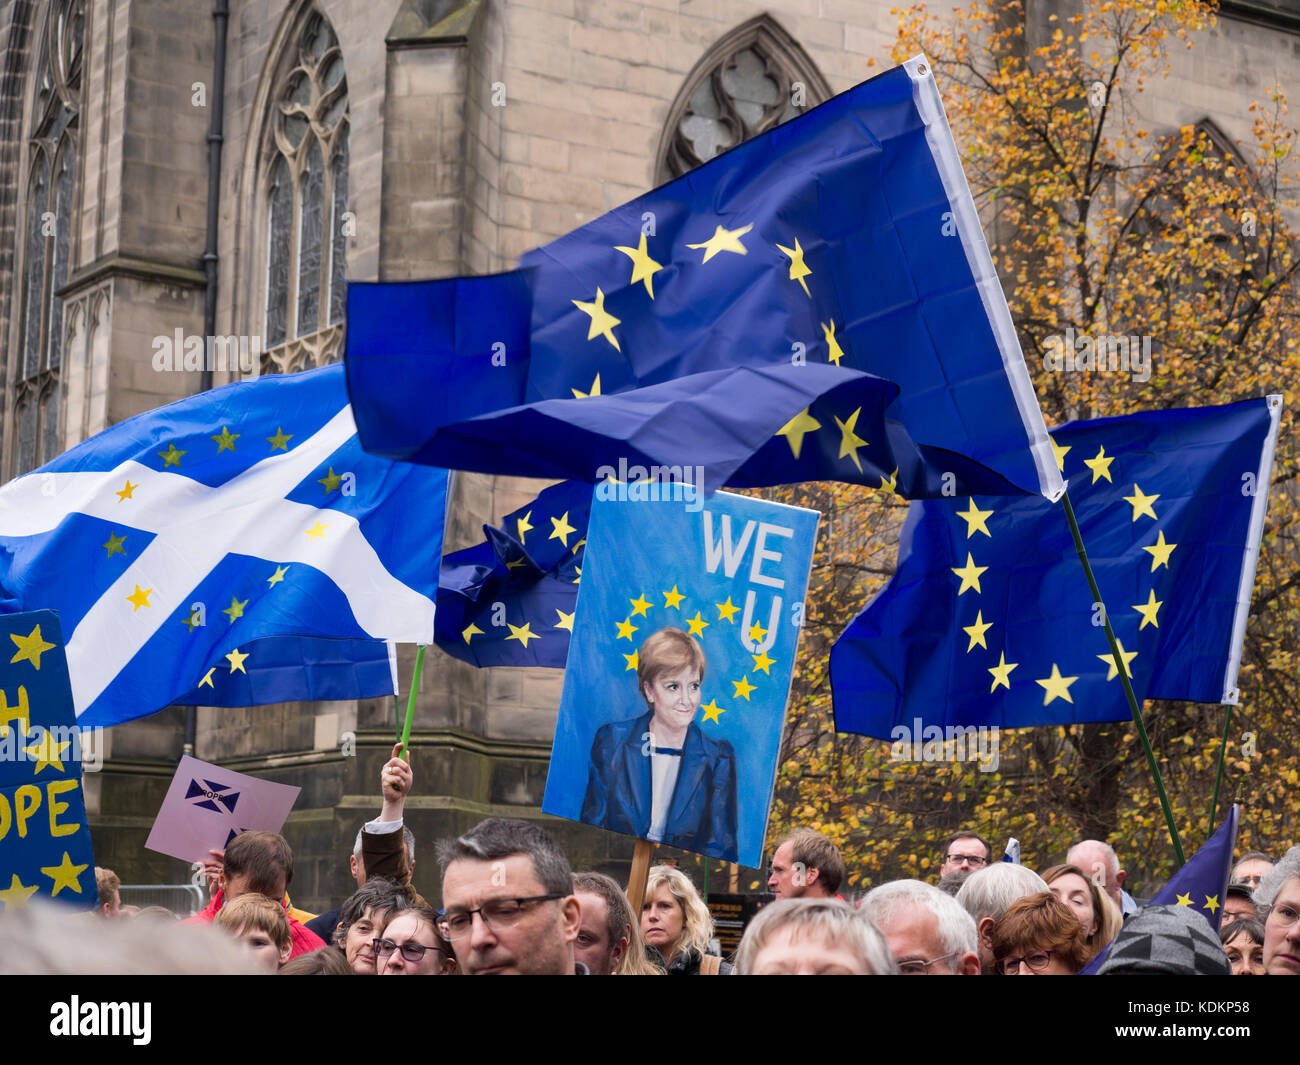 Edinburgh, UK - Oct 14, 2017: Pro EU supporters pictured as they gathered to listen to speechs at a rally against Bexit held in Edinburgh, Scotland as one of a number of gatherings across the UK to show support for continued membership of the European Union. Credit: AC Images/Alamy Live News Stock Photo